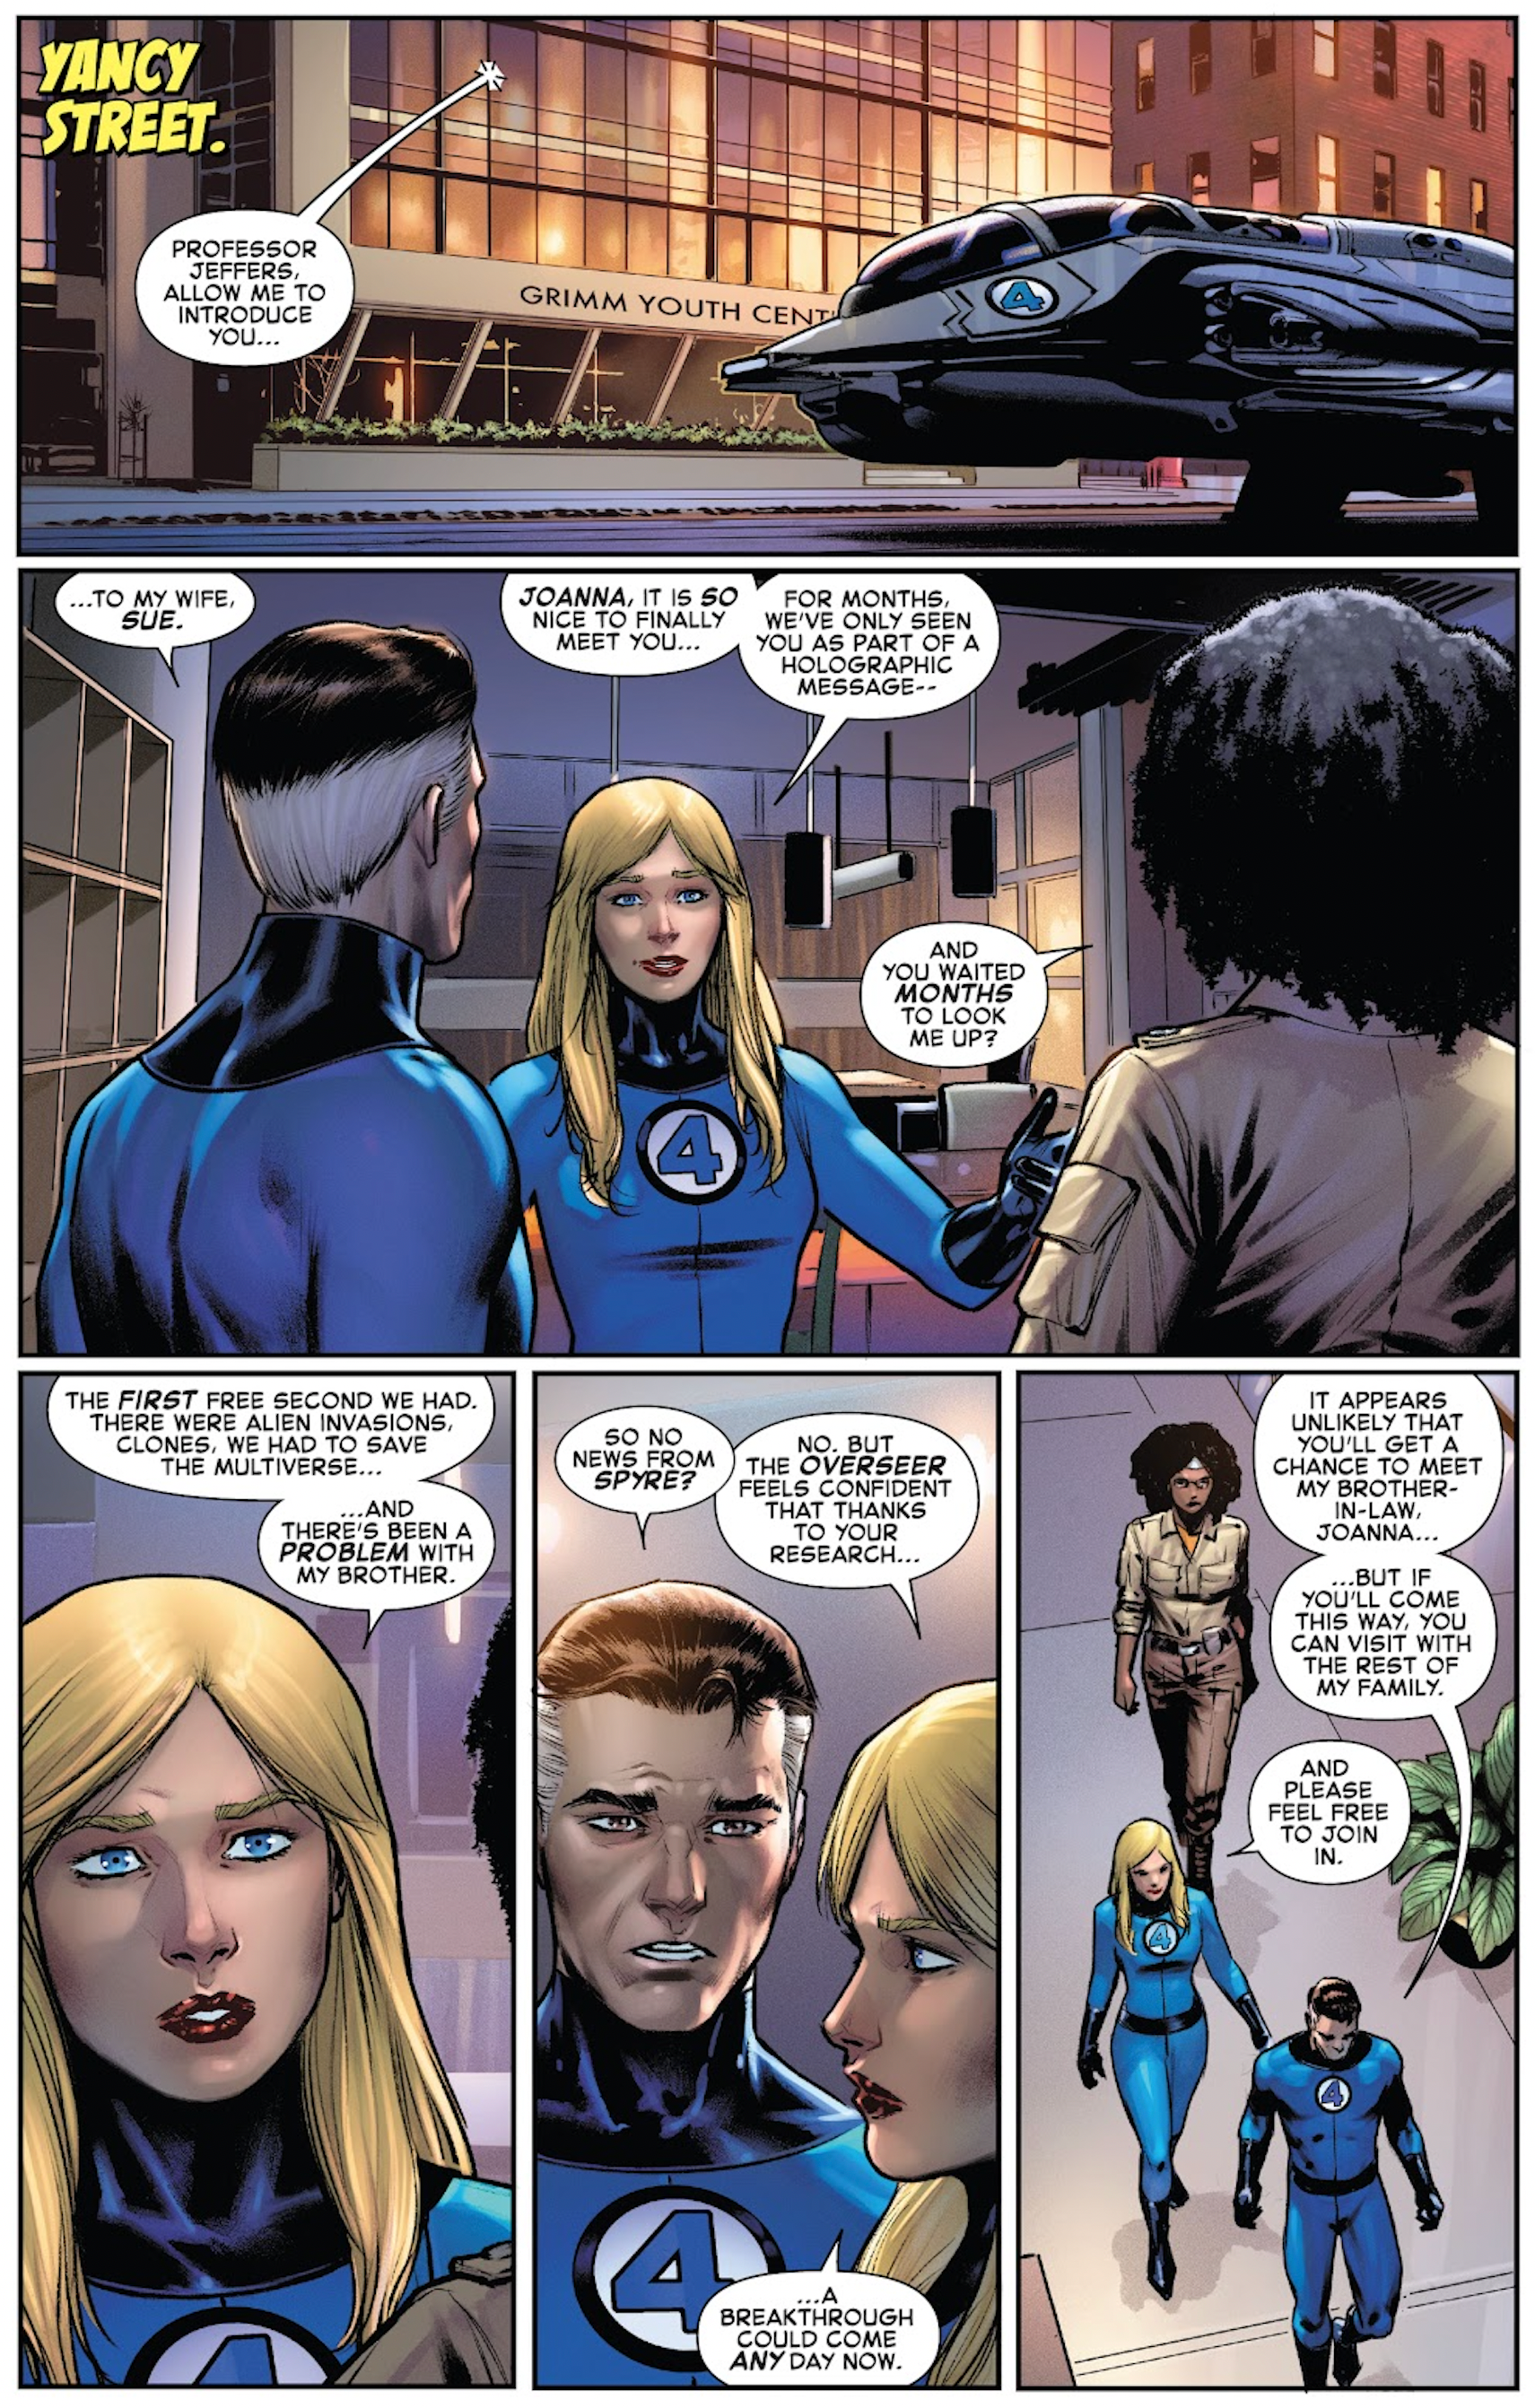 Fantastic Four's Reed Richards and Susan Storm